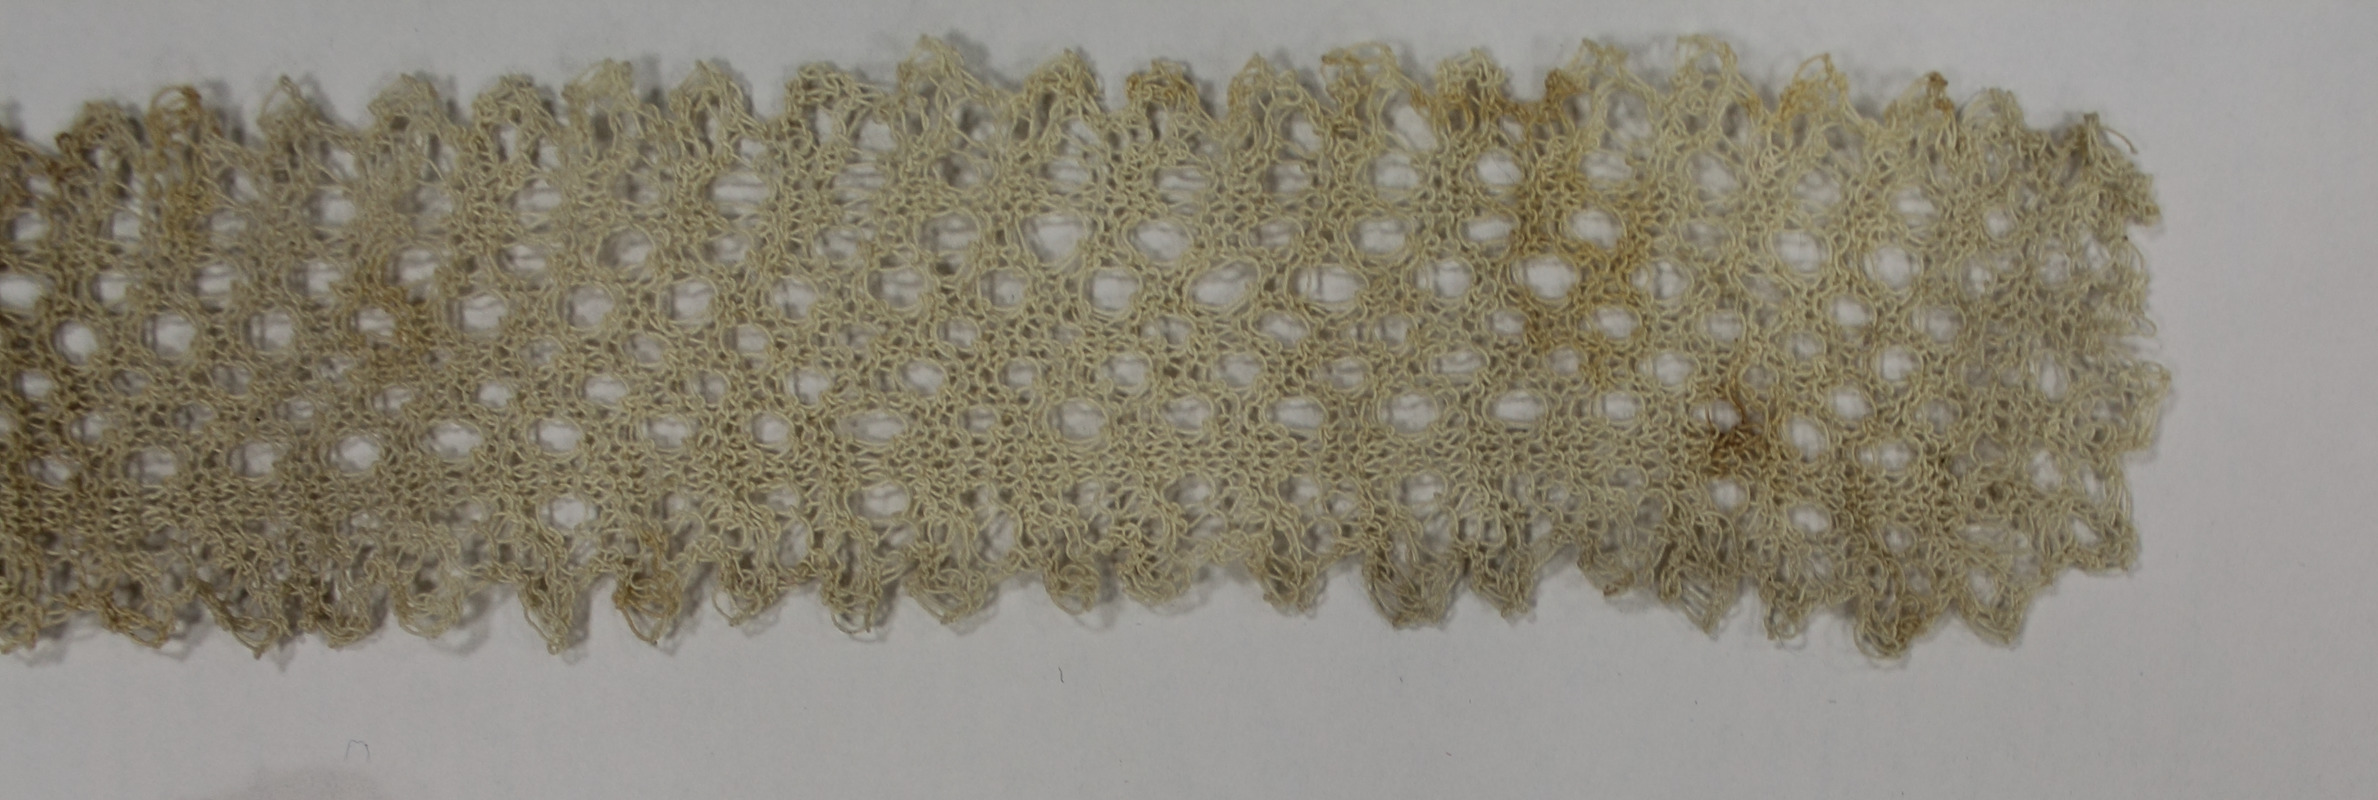 Strip of lace, made by Laura Bridgman (close-up)